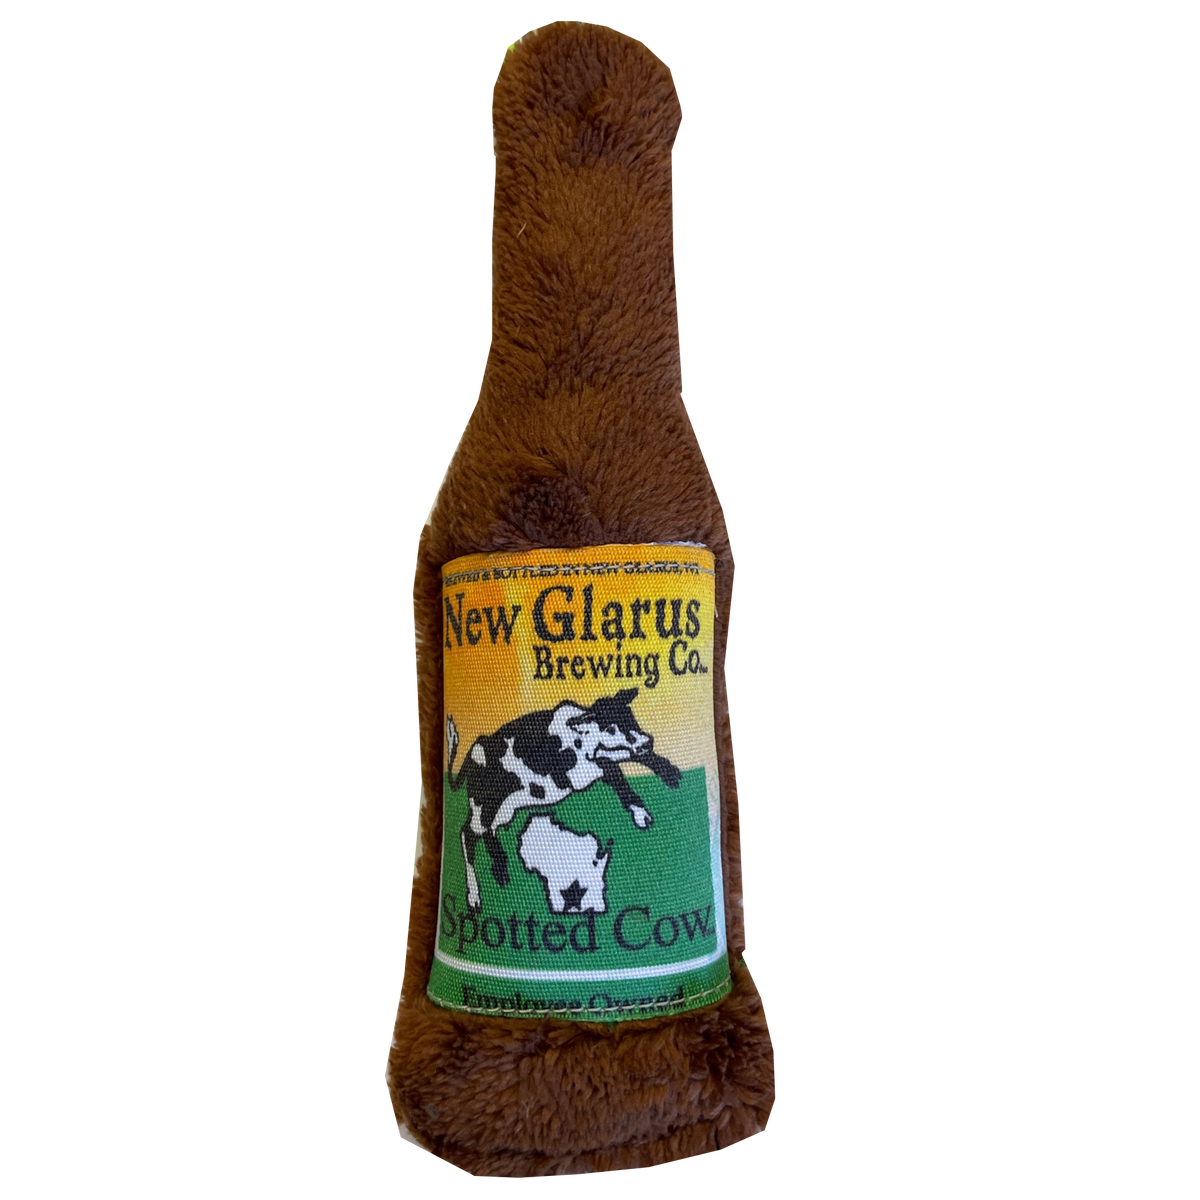 Brown plush dog toy in the shape of a bottle of beer with the Spotted Cow logo on the front.